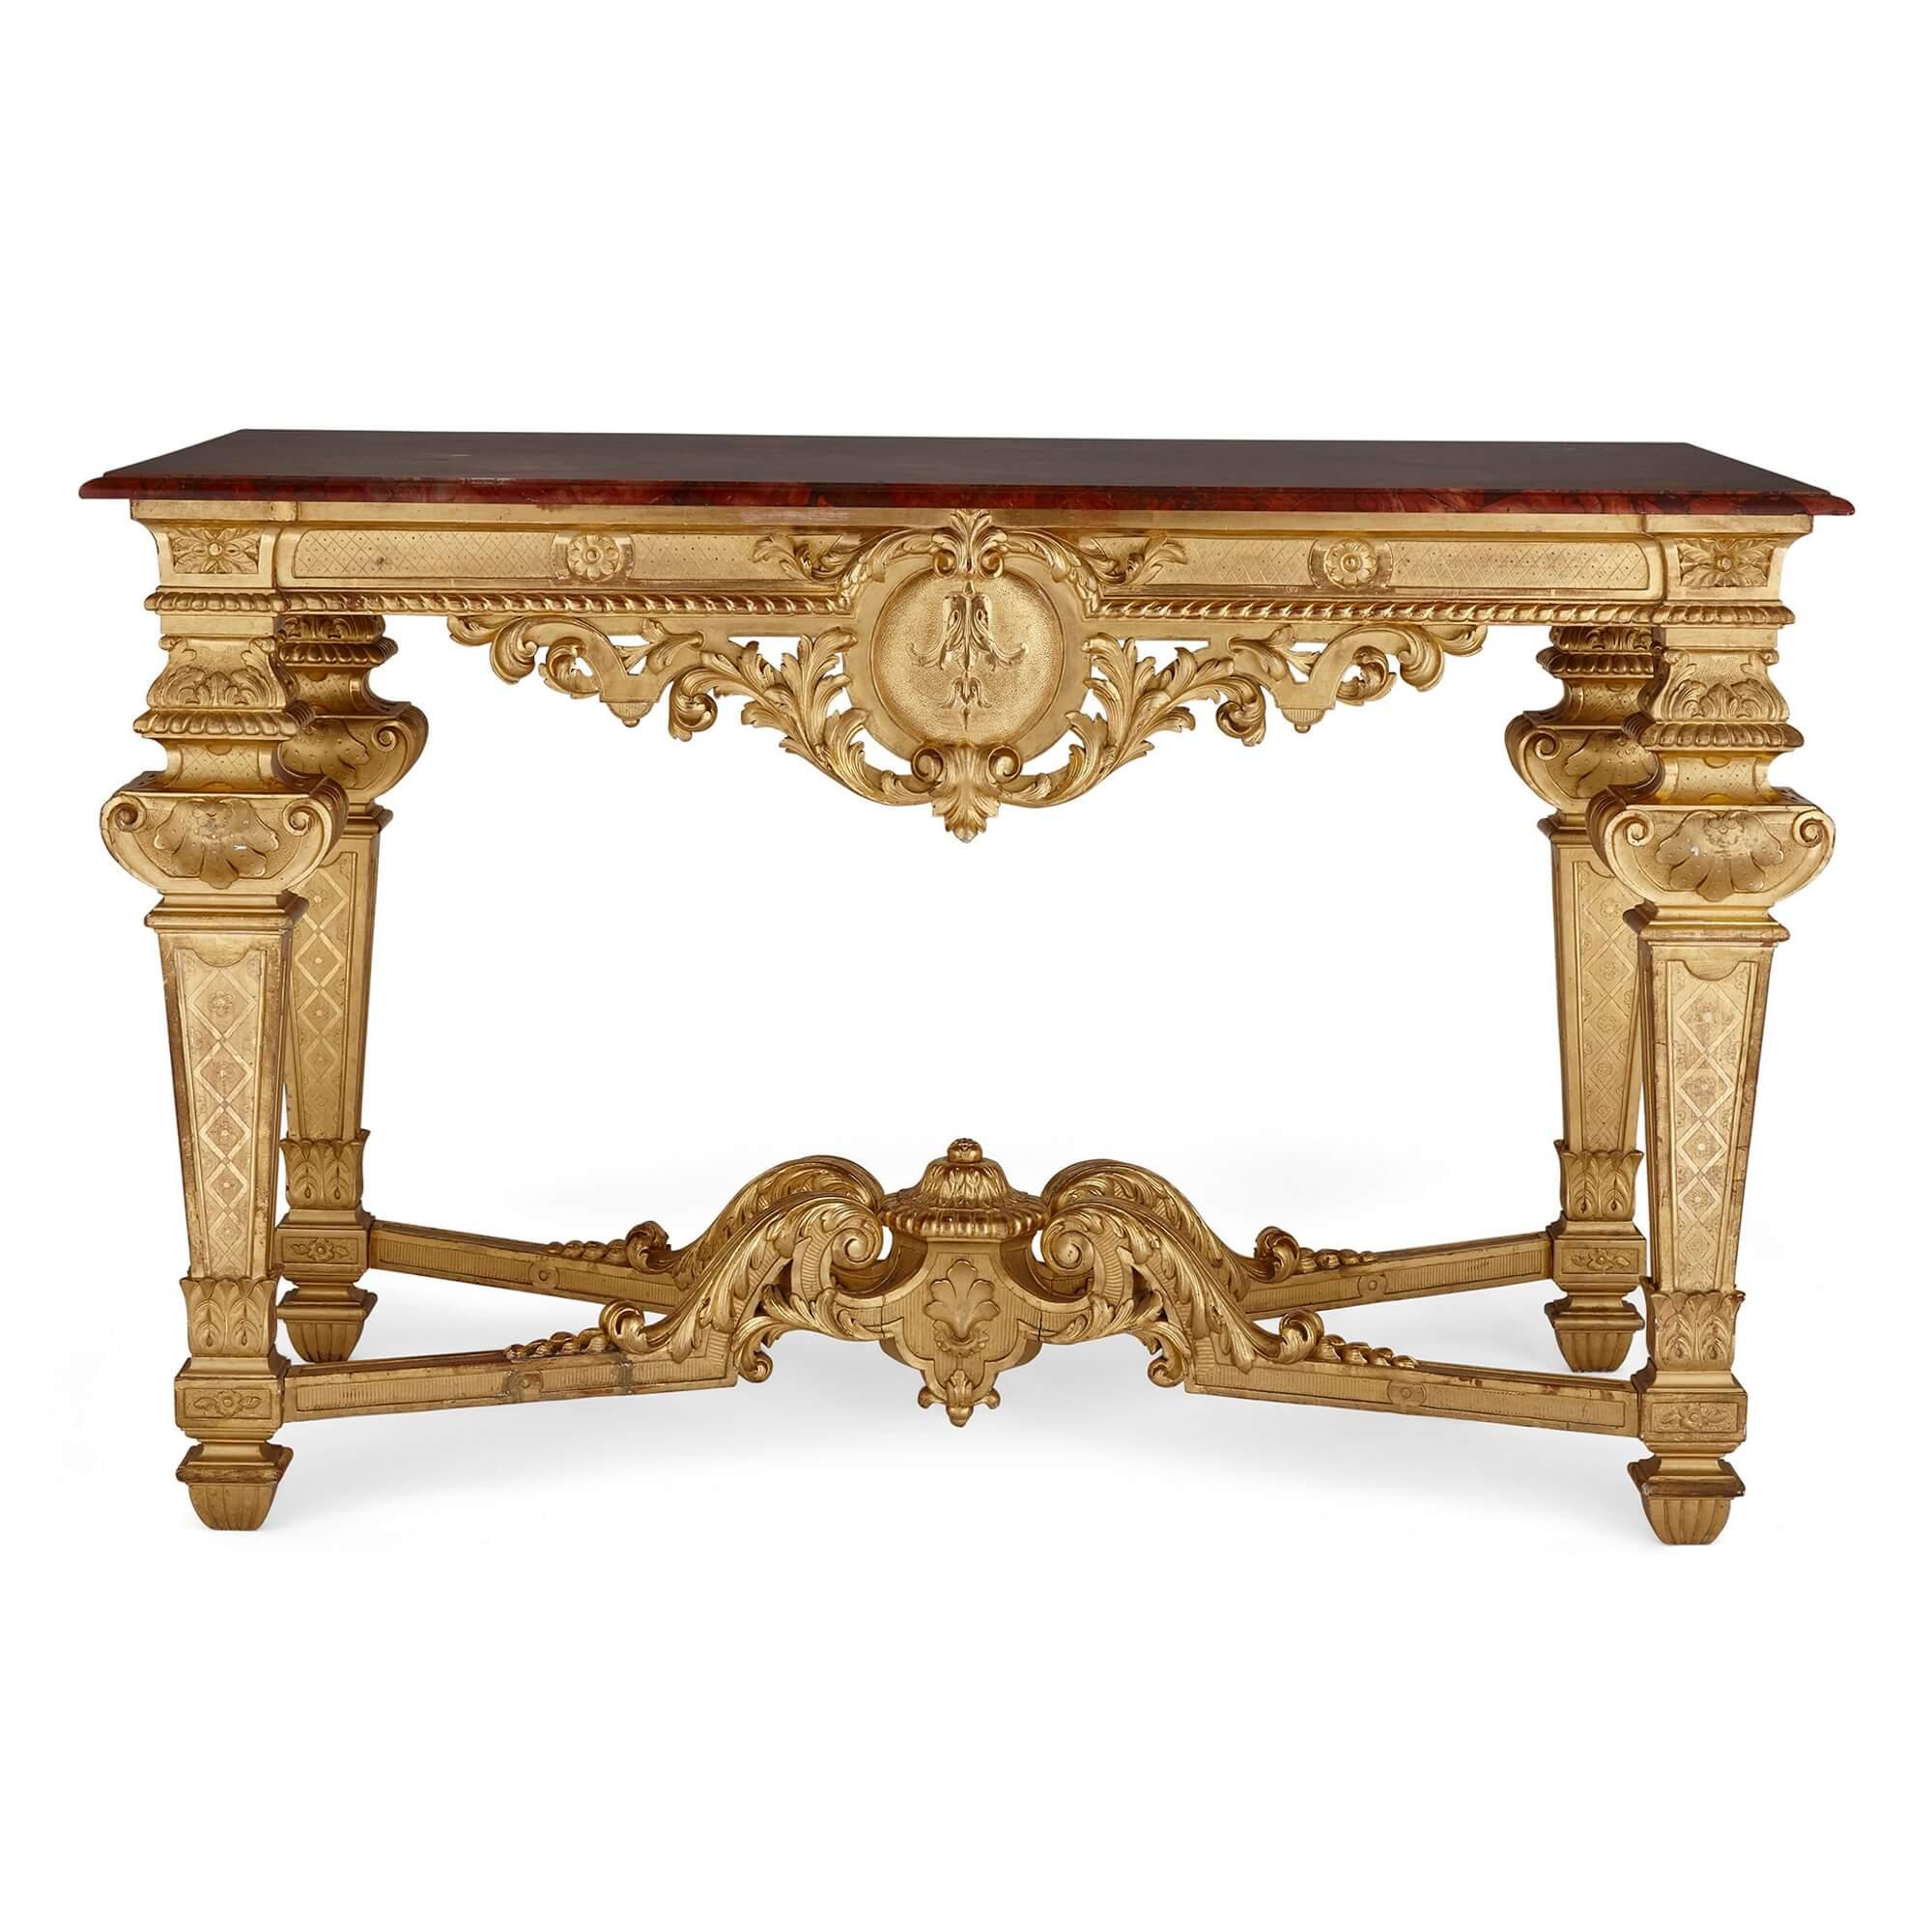 Louis XIV style carved giltwood rectangular console table
Italian, Late 19th Century
Height 90cm, width 142cm, depth 65cm

This Belle Epoque table takes inspiration from the very beginning of the French Golden Age of furniture making in the 18th